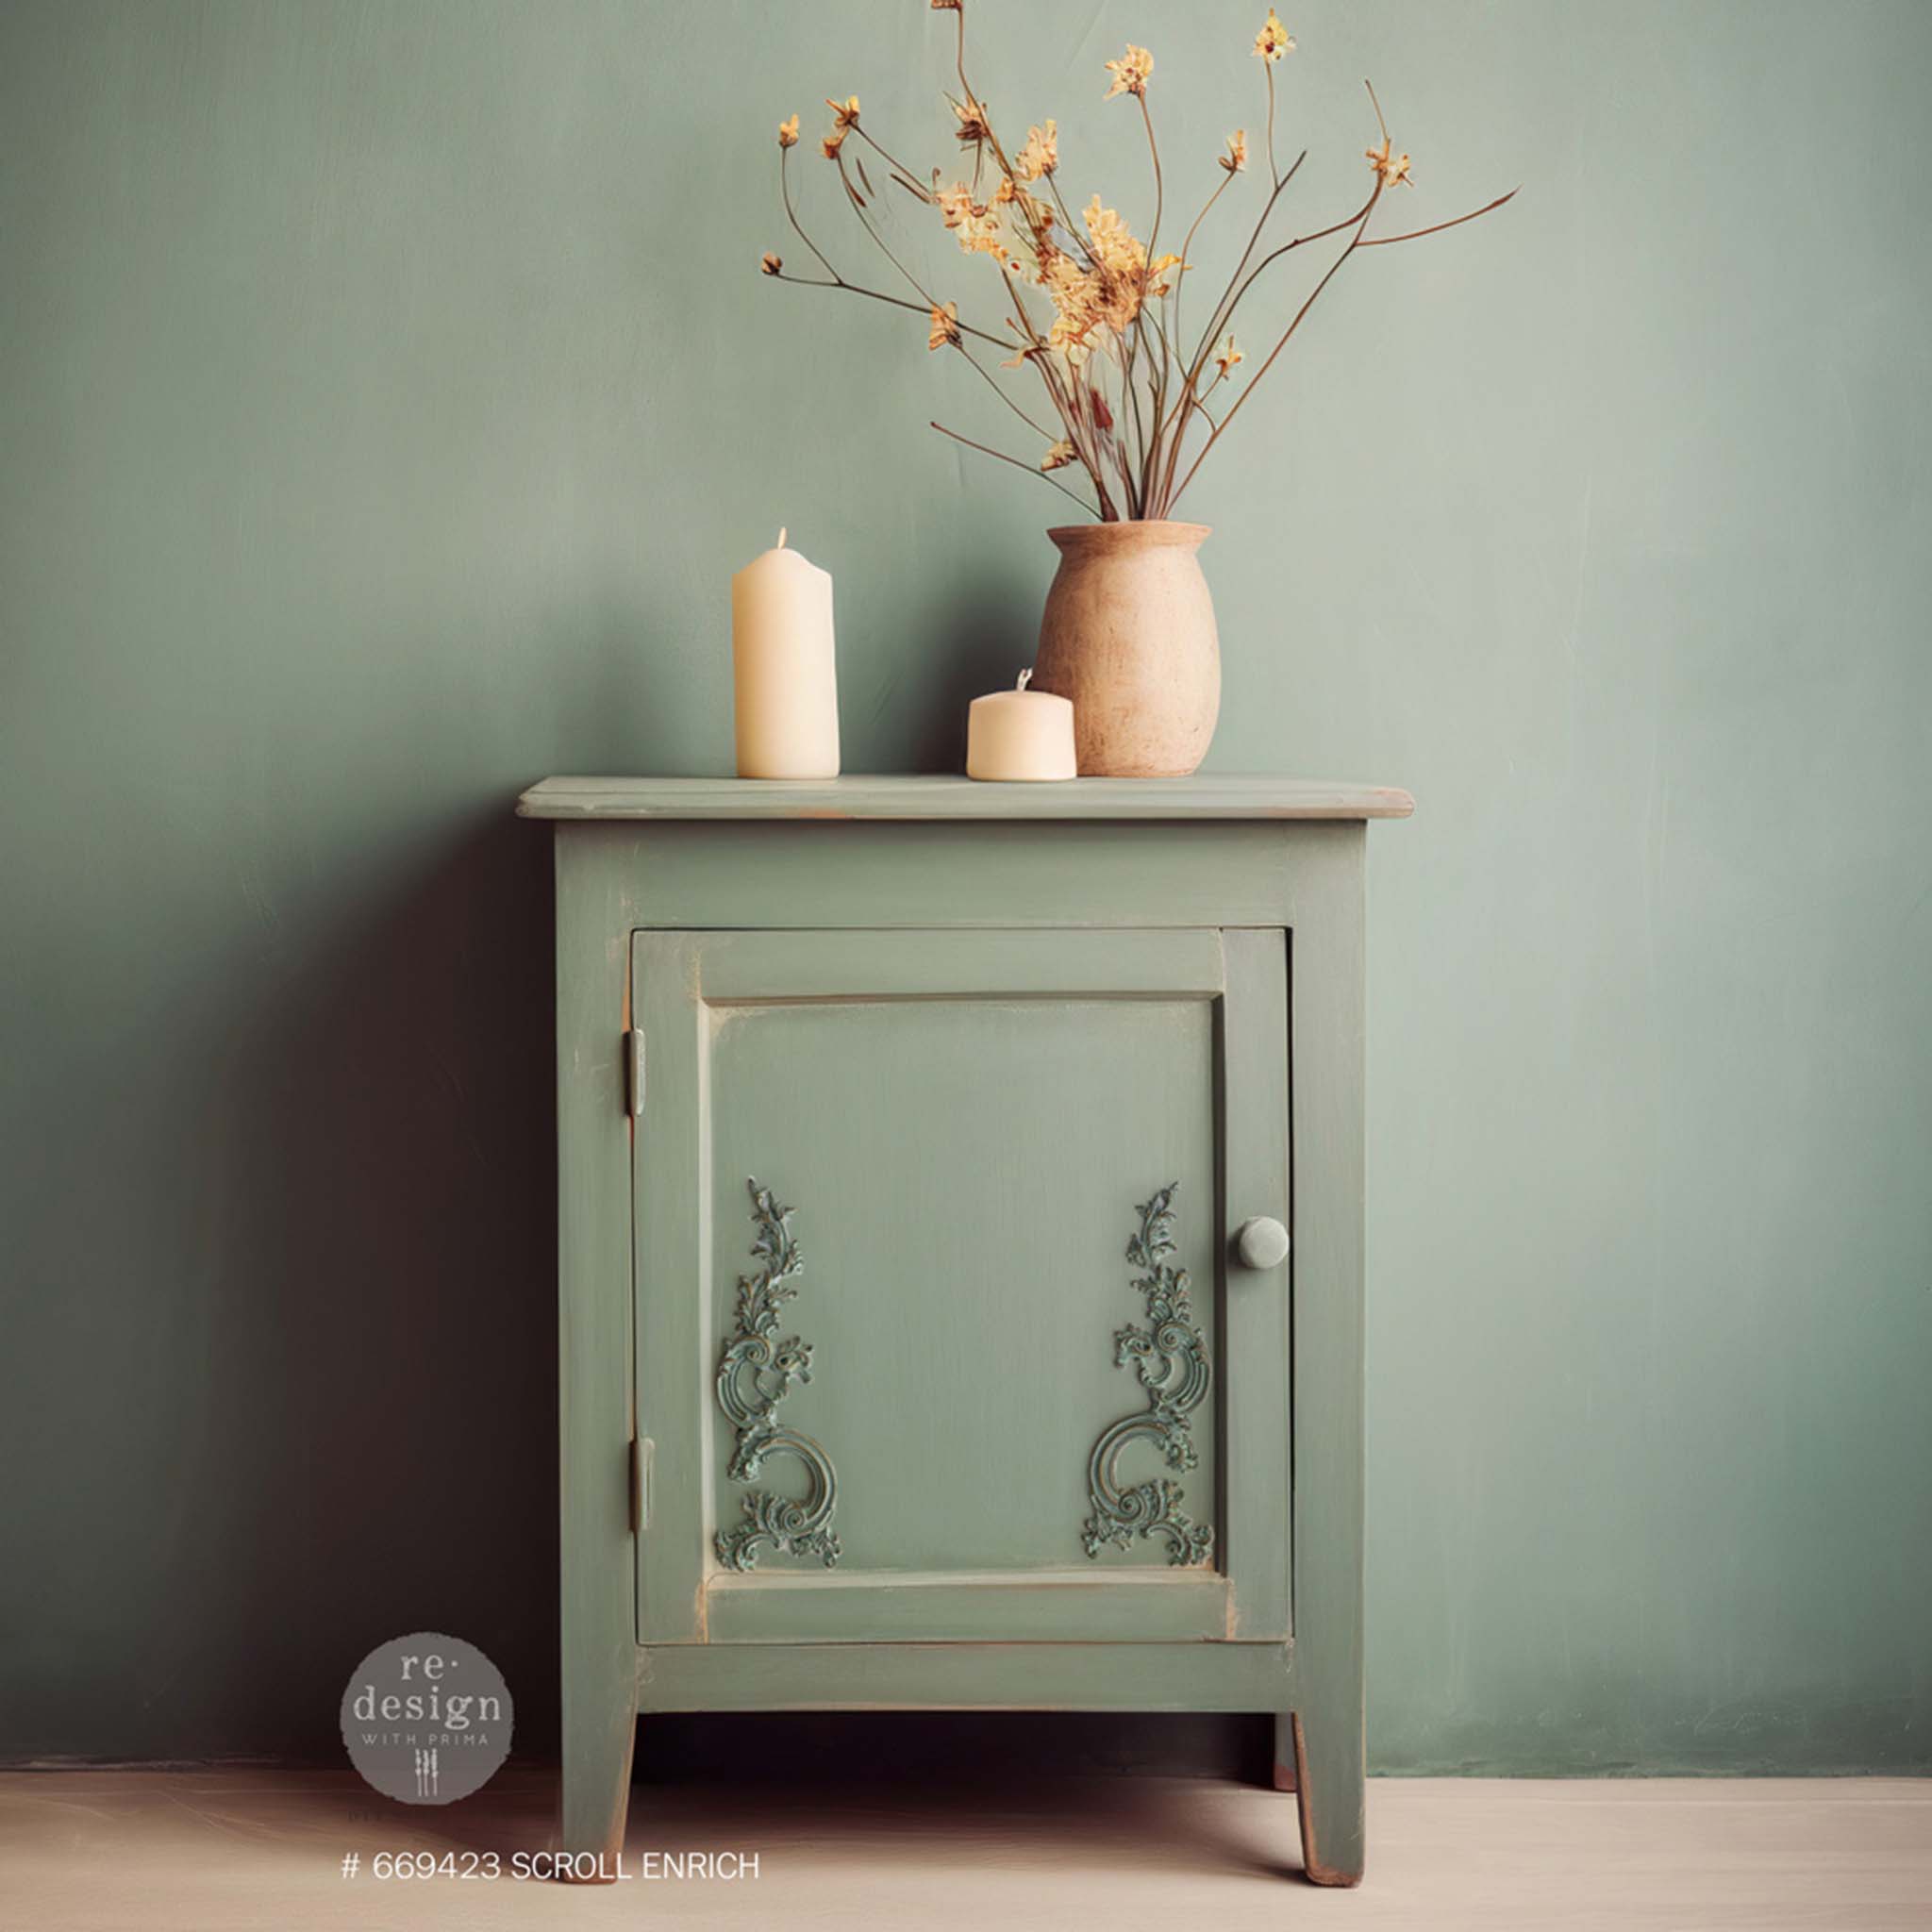 A small side table with storage is painted light sage green and features ReDesign with Prima's Scroll Enrich Decor Poly Casting on the bottom right and left inlay door corners.